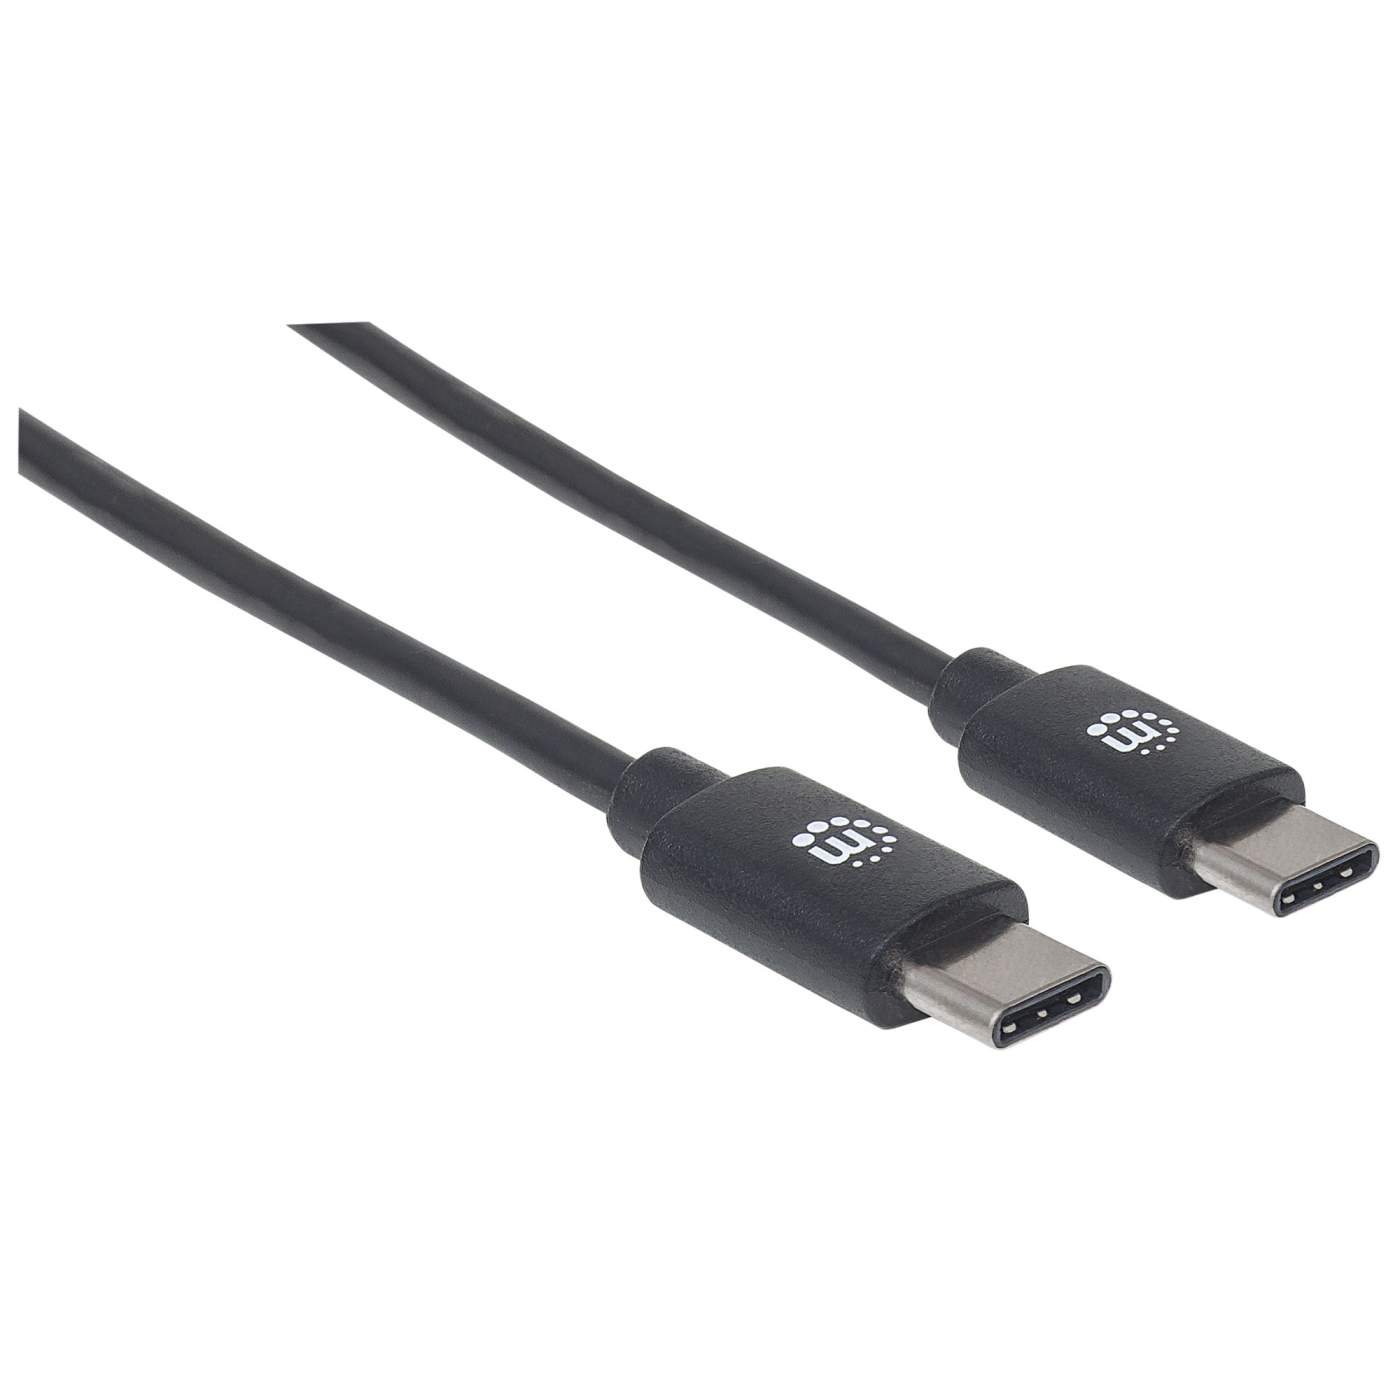 USB 2.0 Type-C Device Cable Image 3